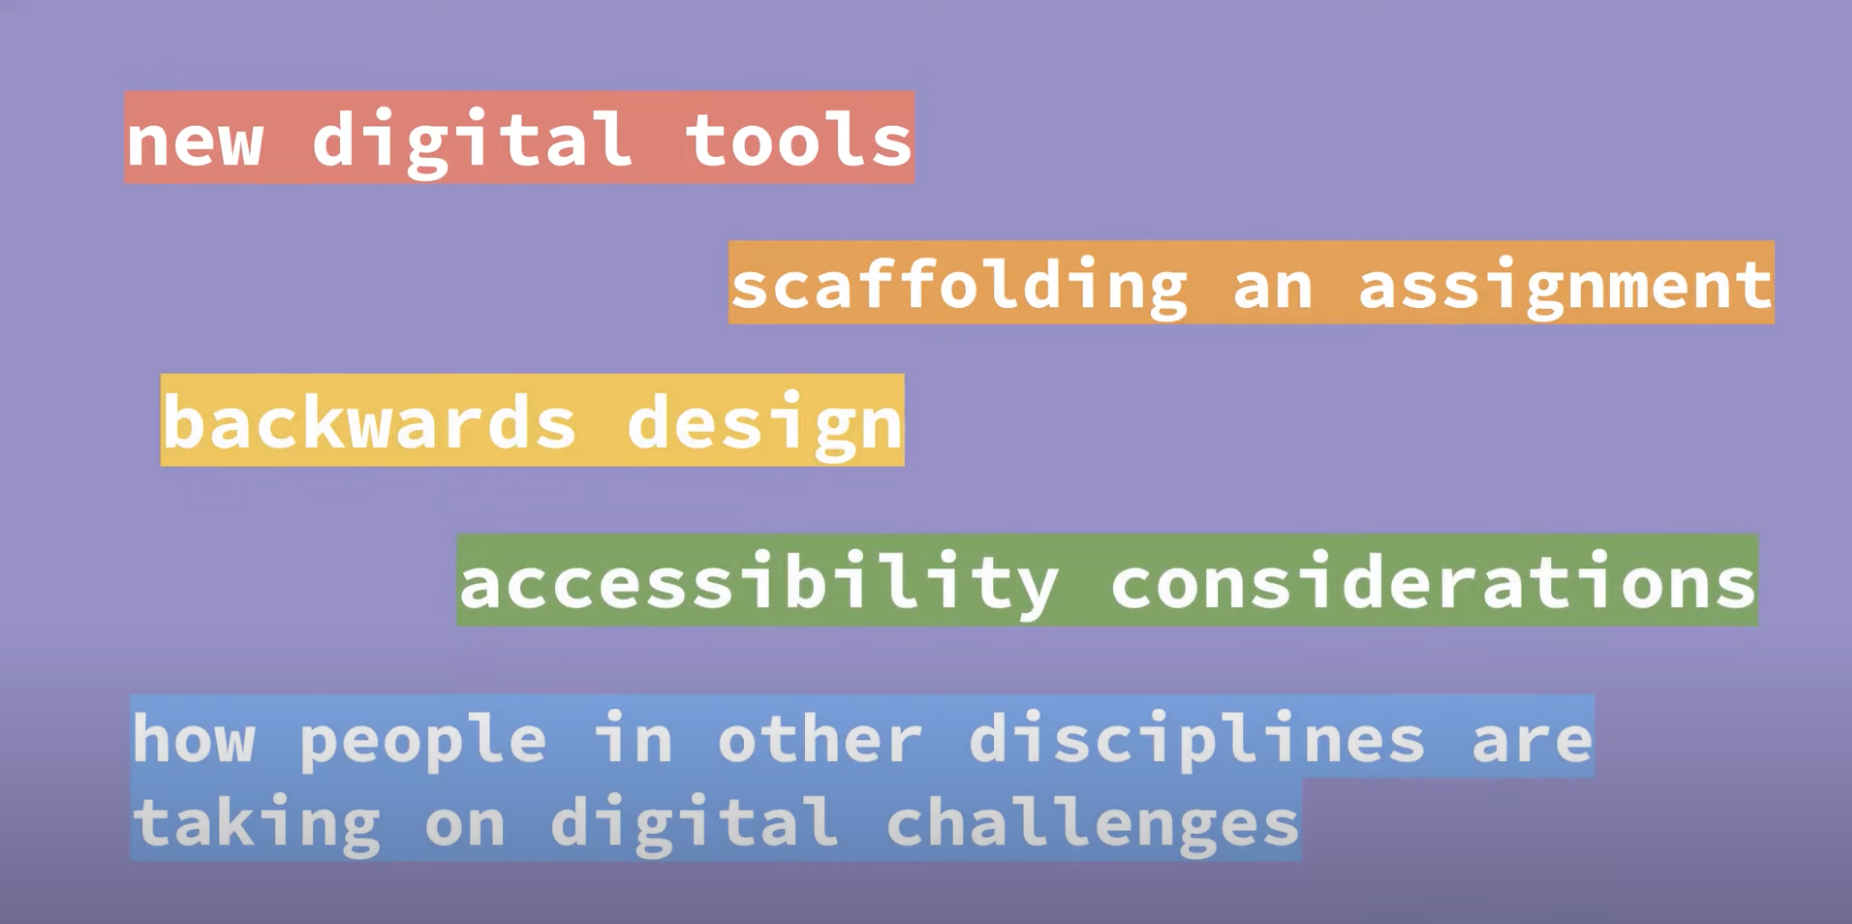 White text on purple background, reading "New digital tools; scaffolding an assignment; backwards design; accessibility considerations; how people in other fields are taking on digital challenges"   